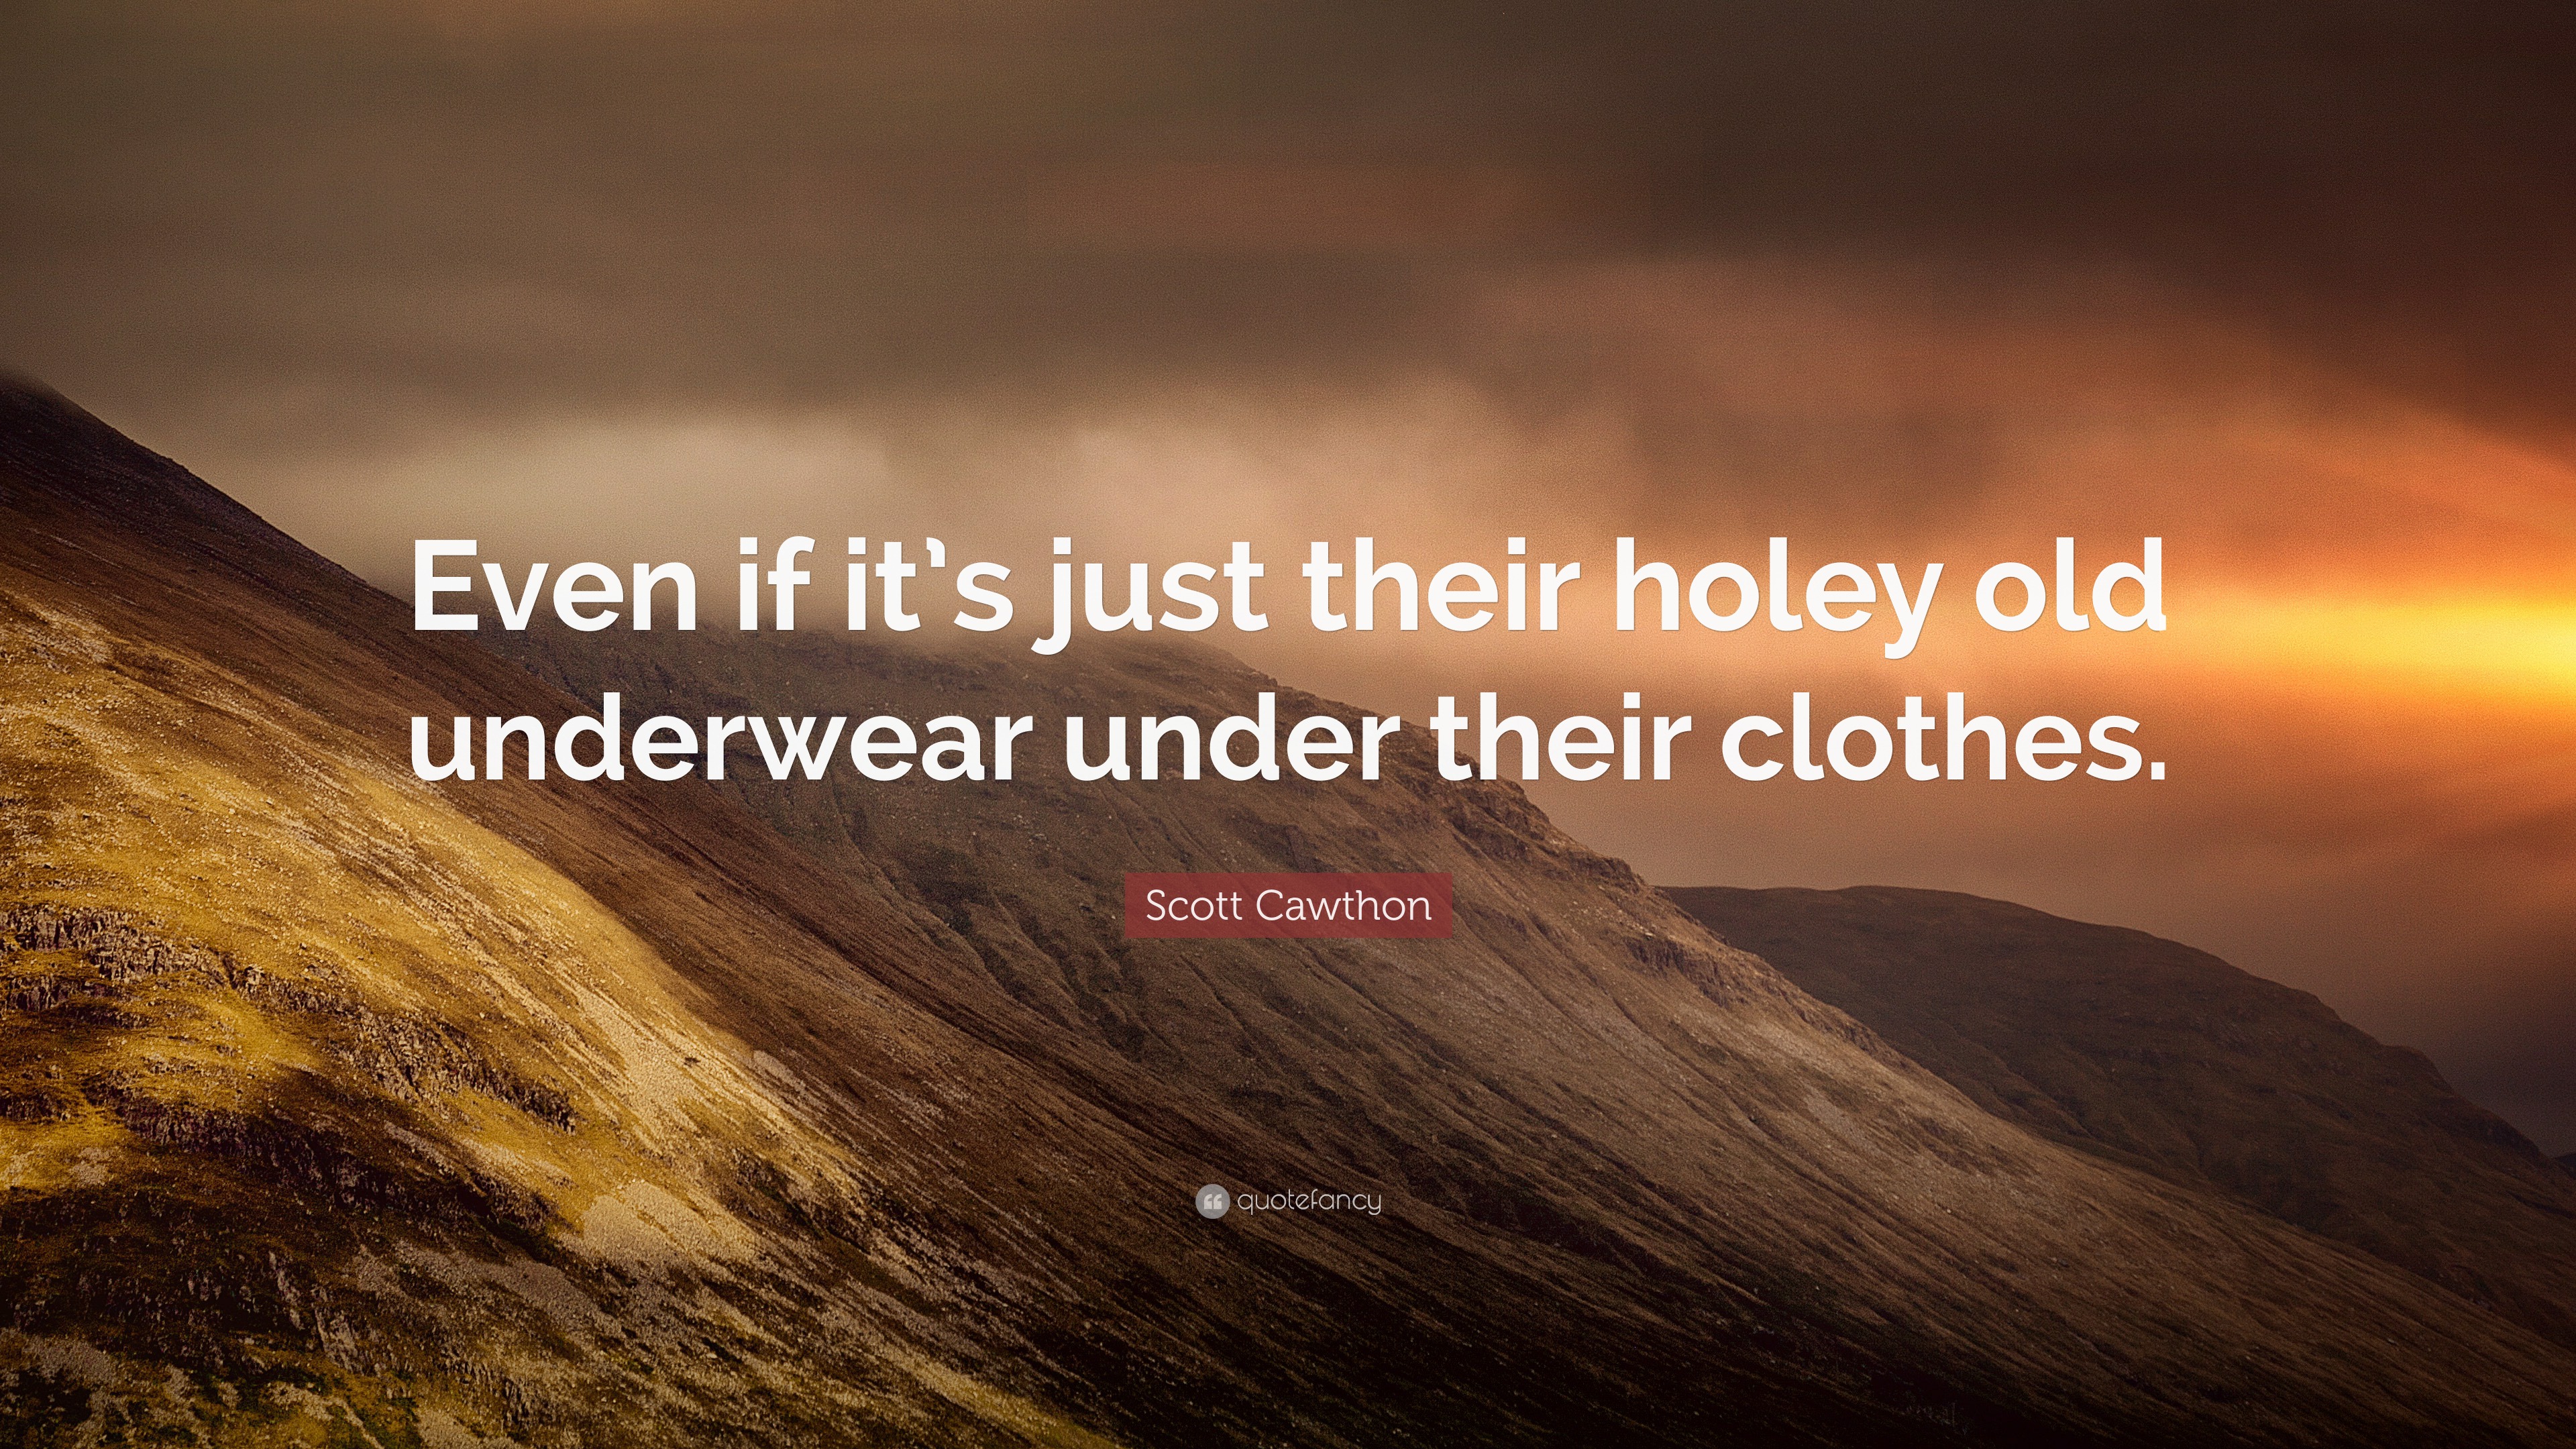 Scott Cawthon Quote: “Even if it's just their holey old underwear